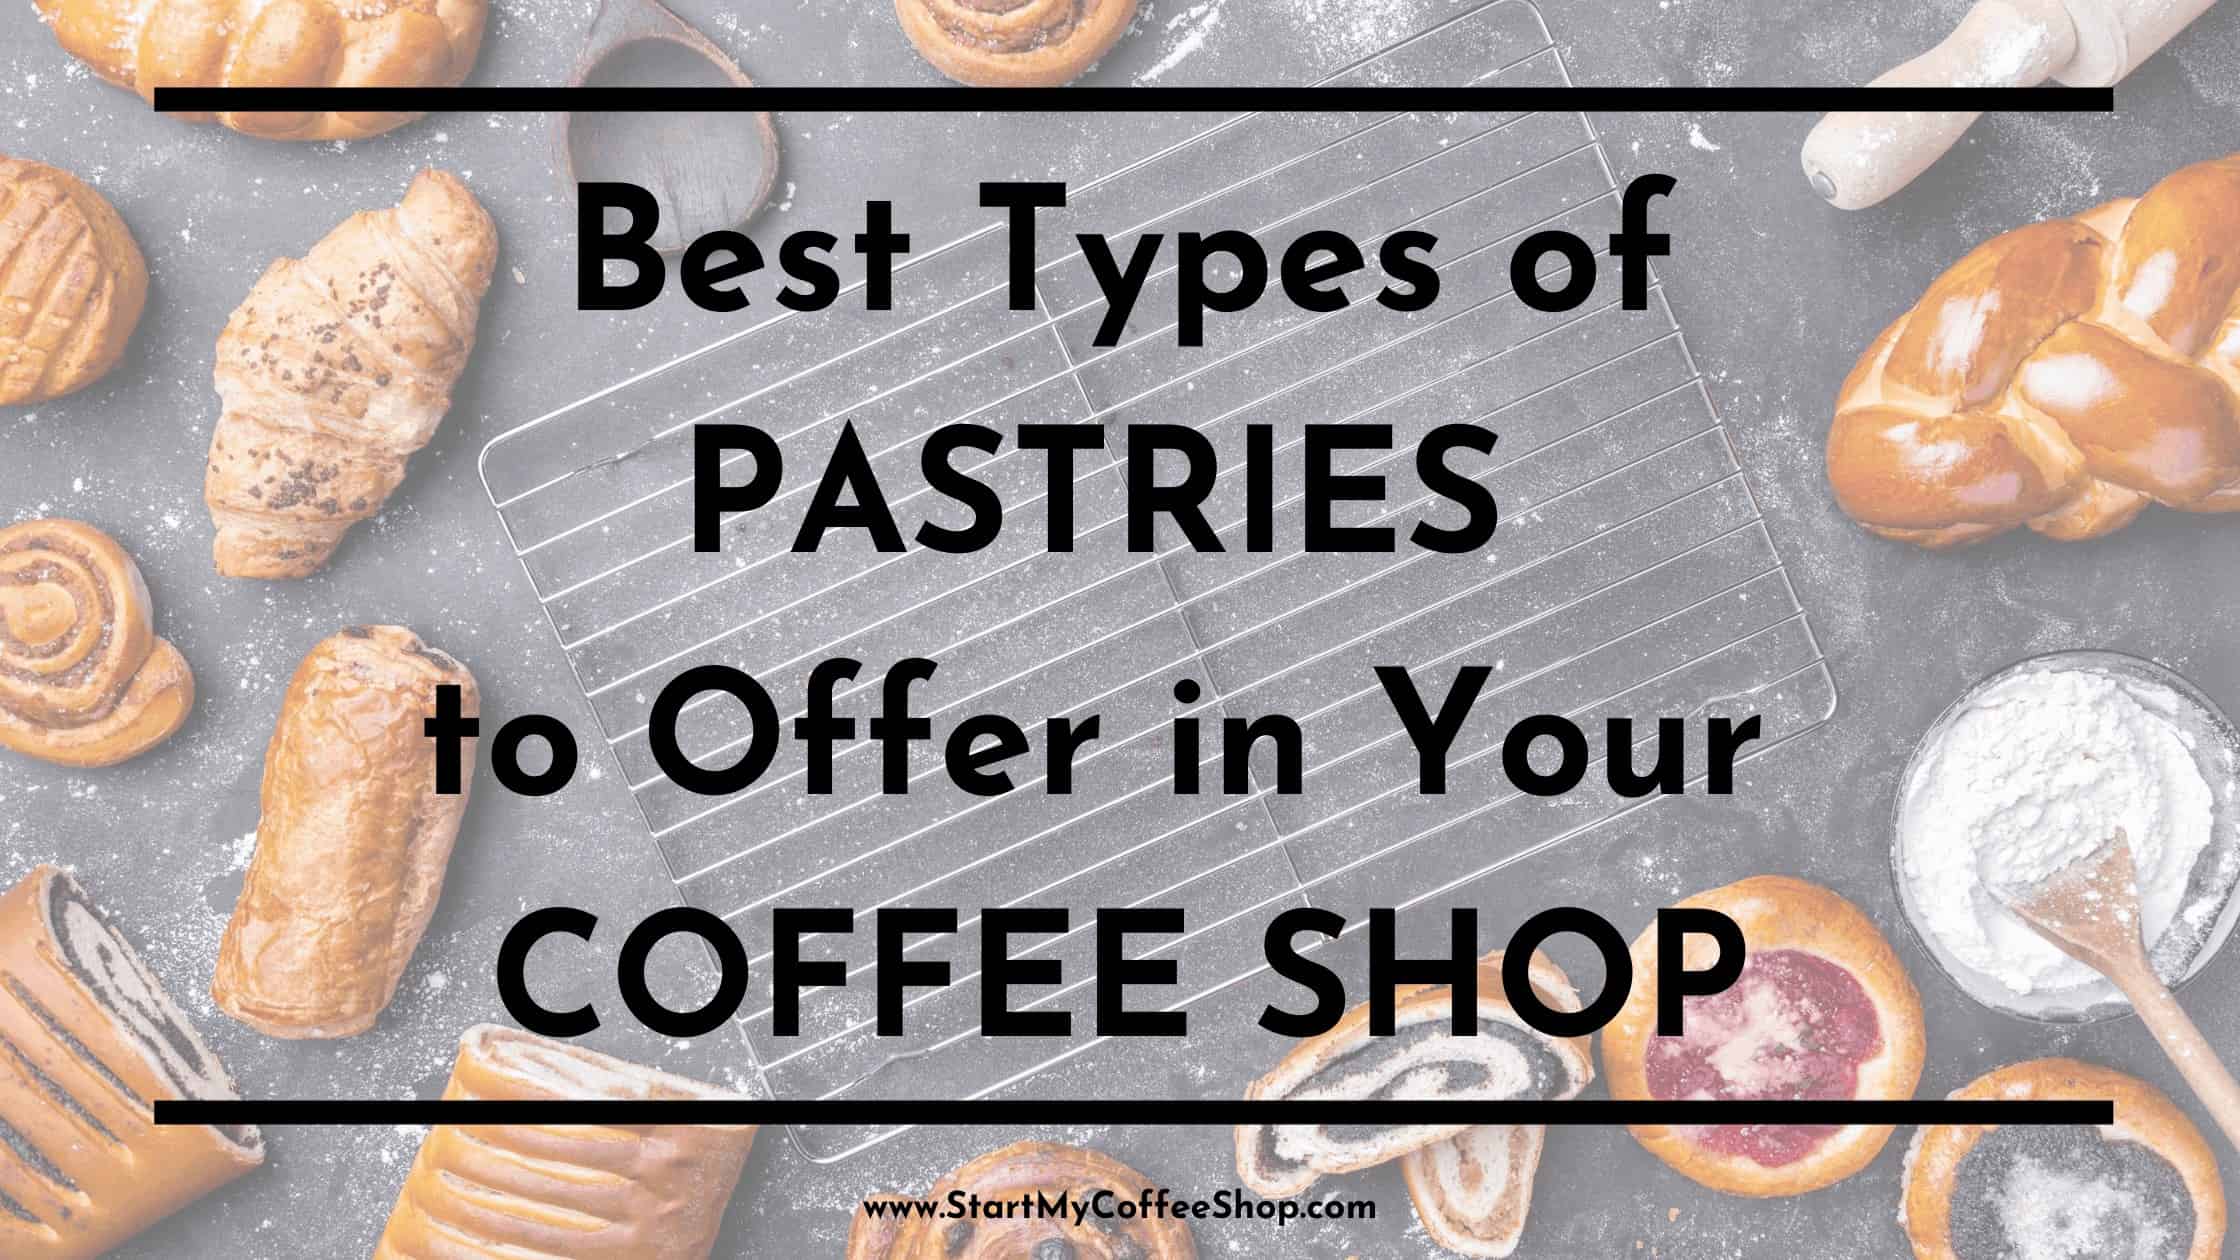 Best Types of Pastries to Offer in Your Coffee Shop